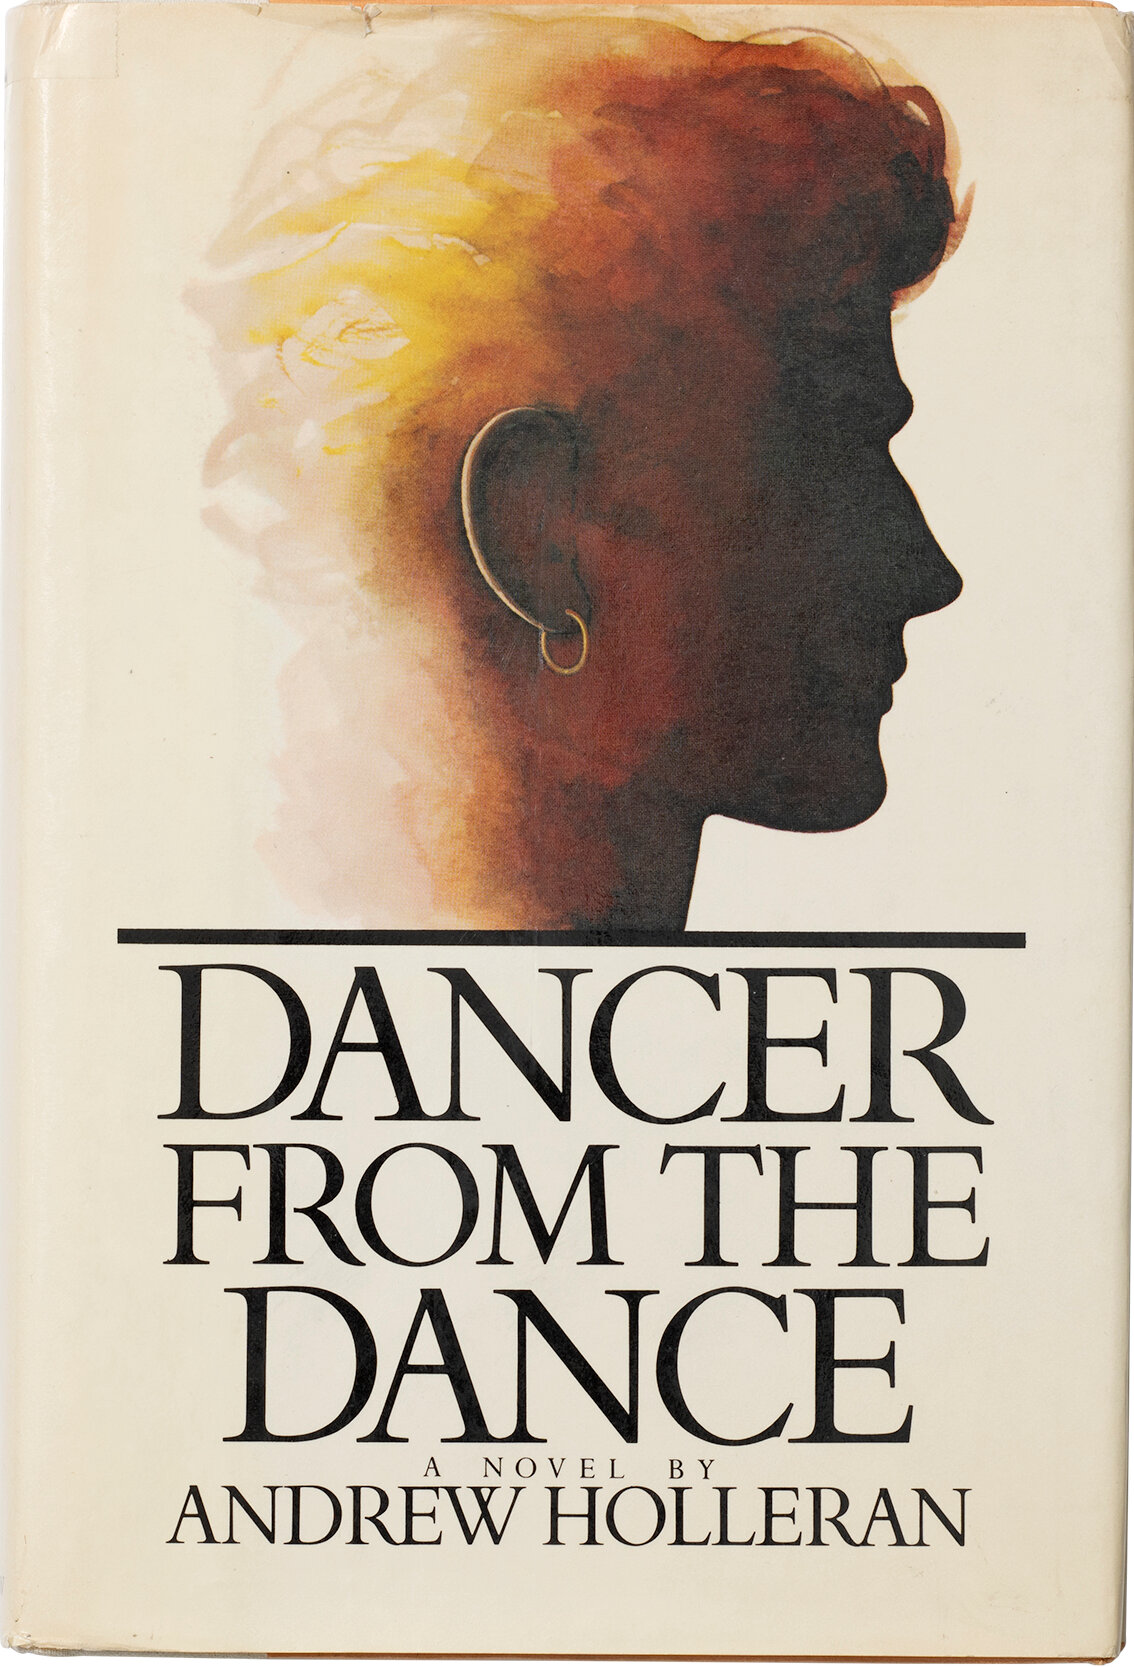 The cover of the book "Dancer From the Dance" with an illustration of a head with short ginger hair and an earring partially silhouetted in profile.